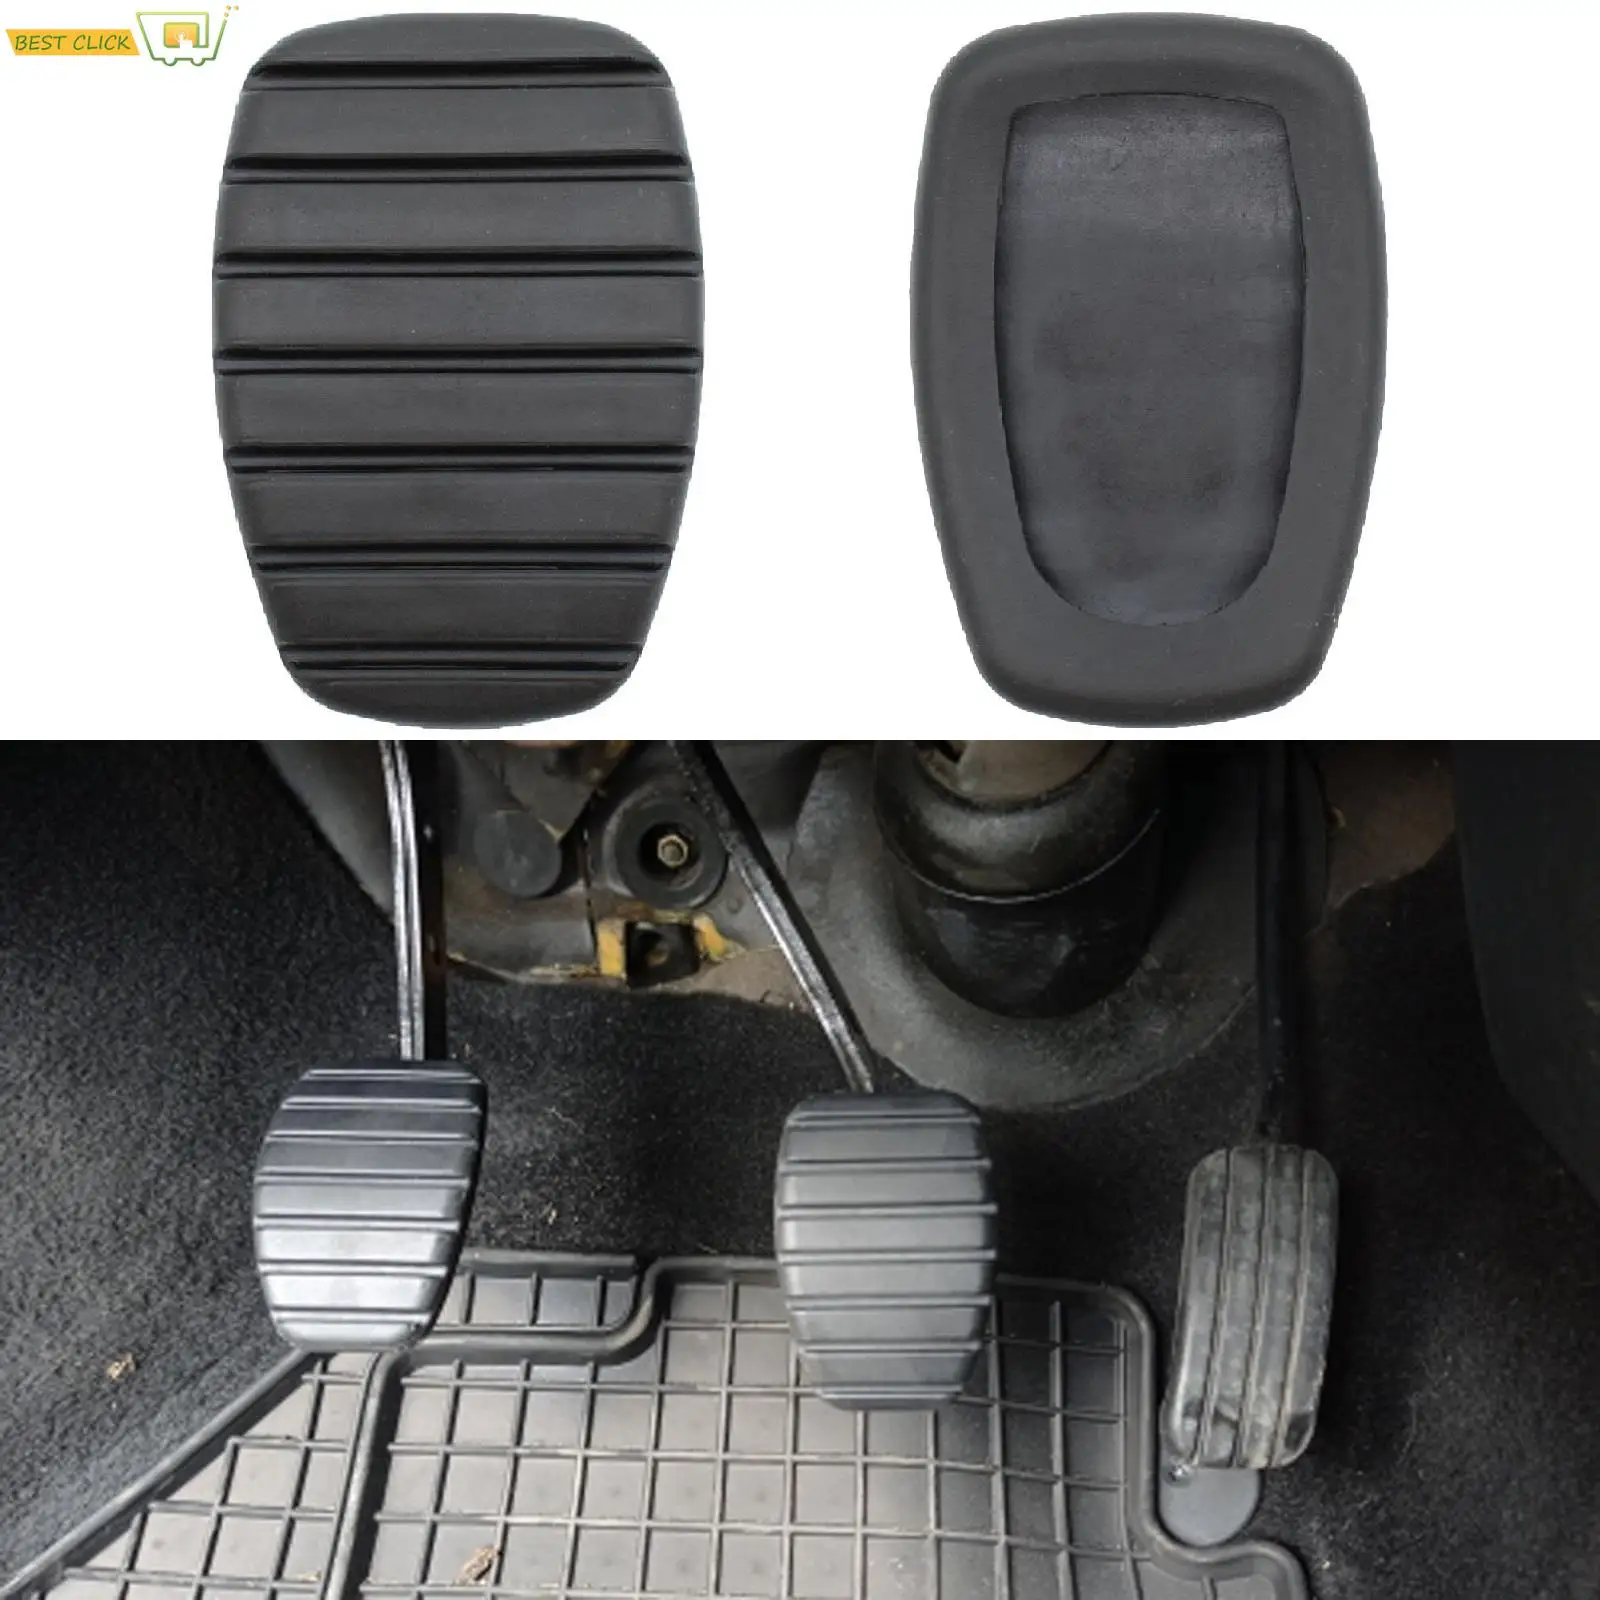 Clutch Rubber-Clutch Brake Pedal Rubber Pad Cover for Renault Megane Laguna Clio Scenic 